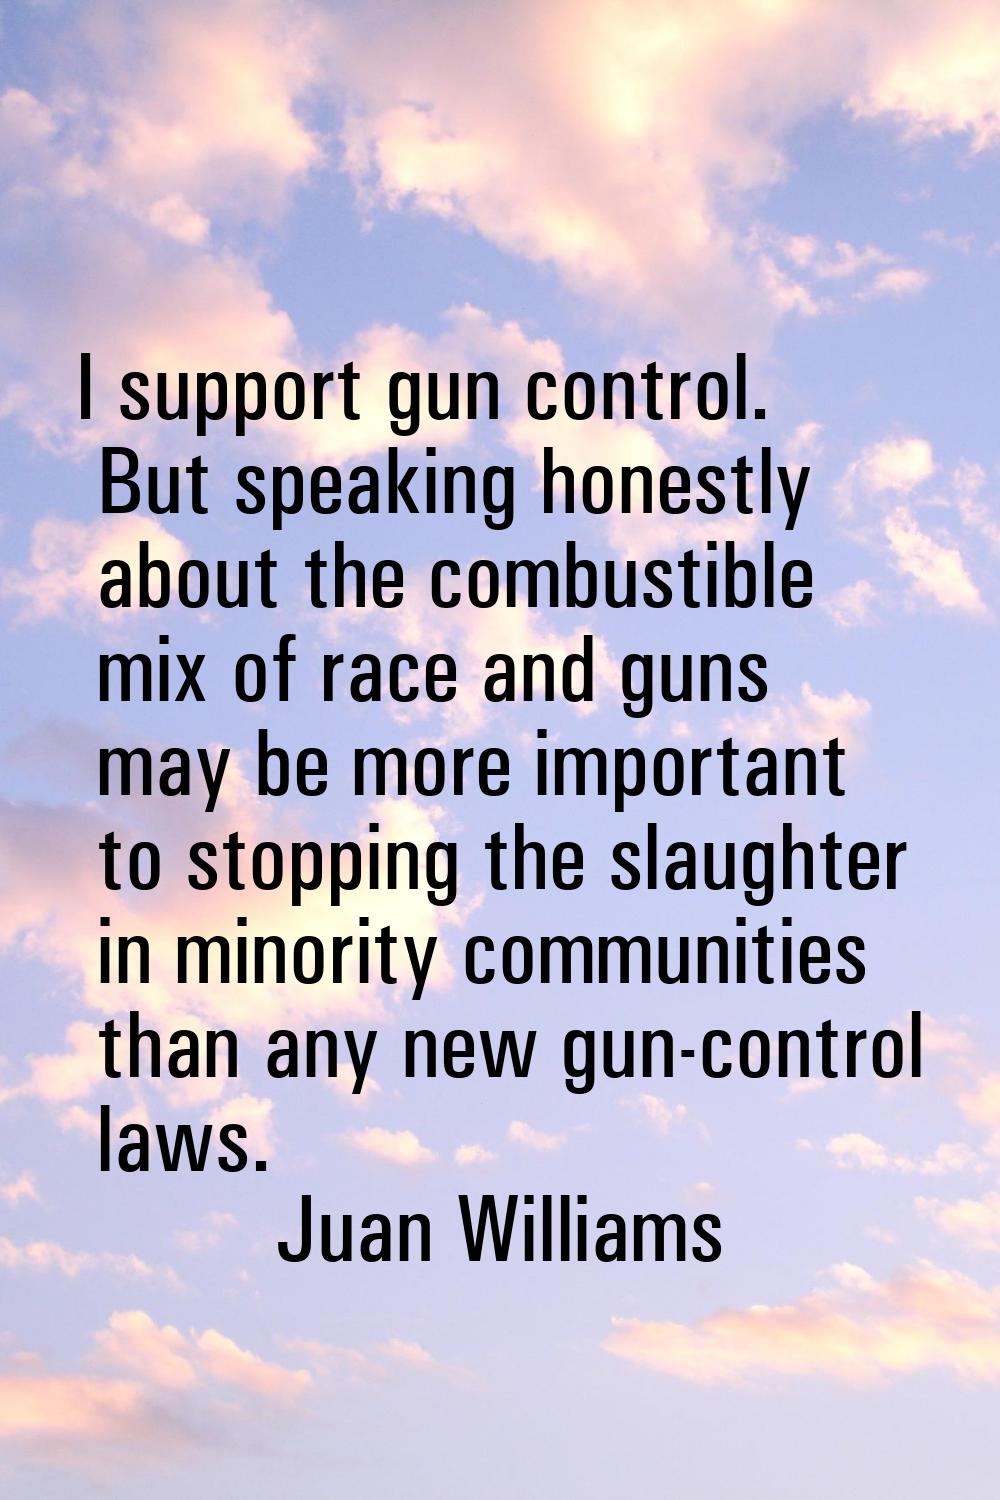 I support gun control. But speaking honestly about the combustible mix of race and guns may be more